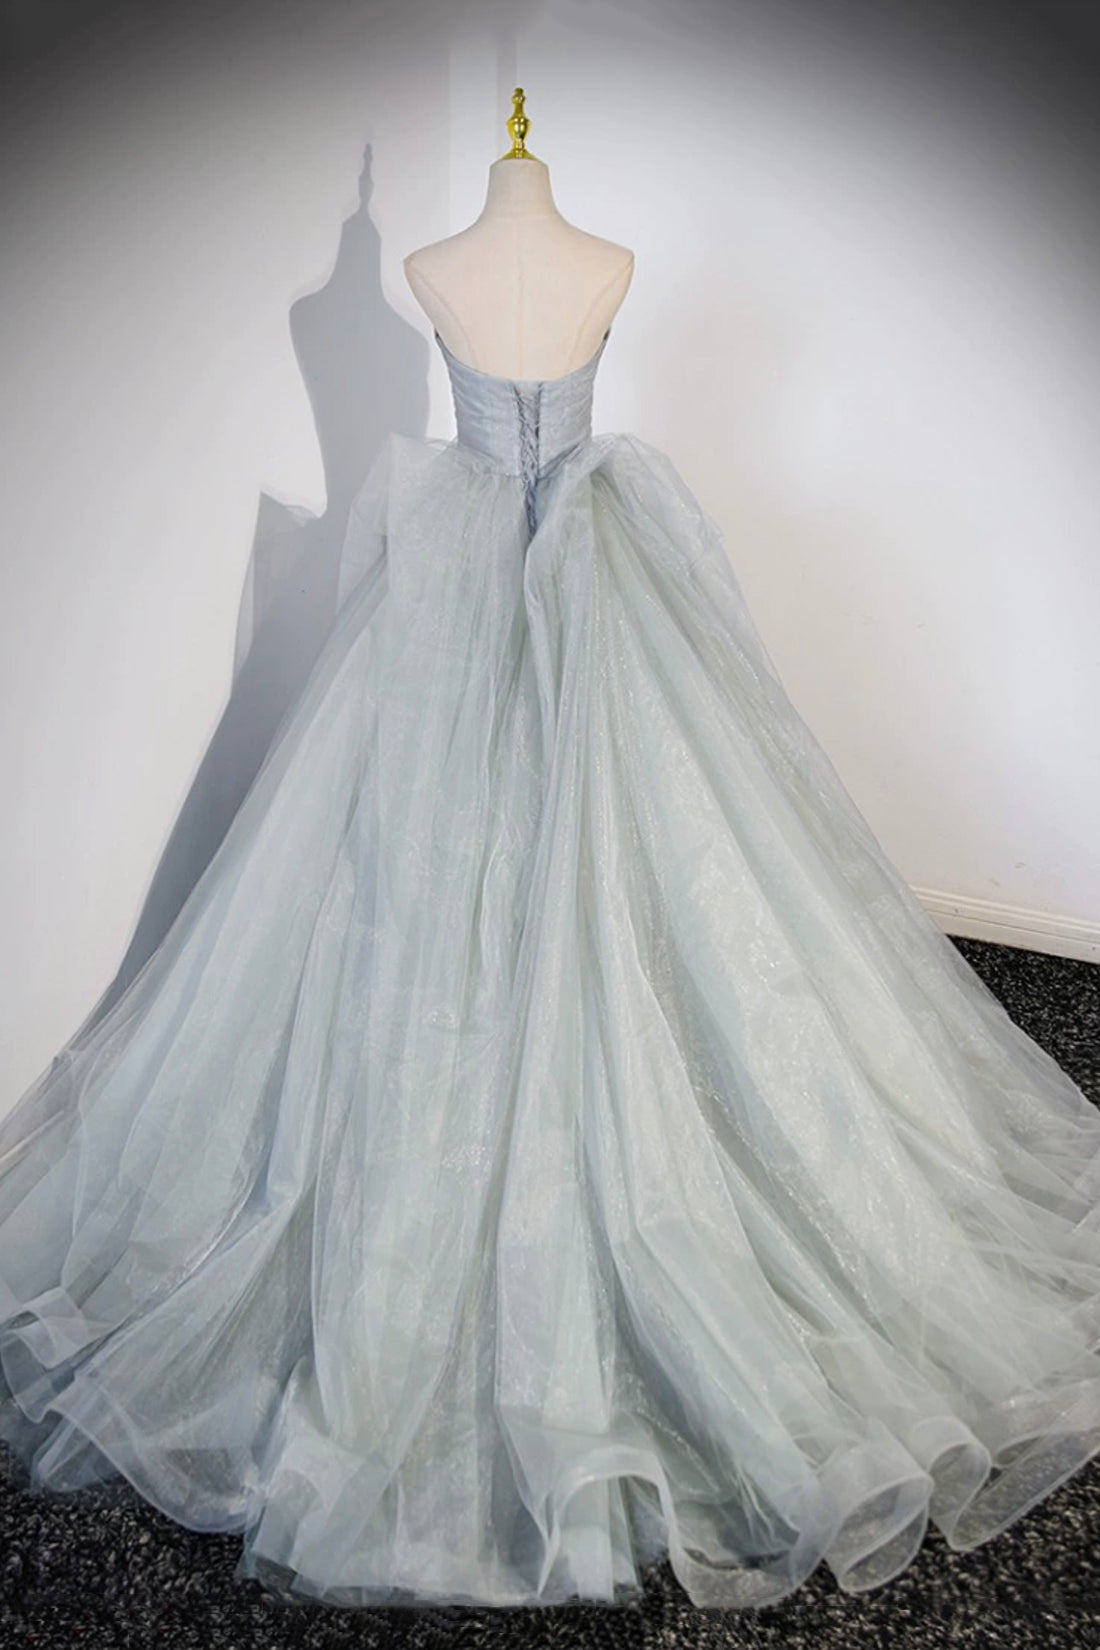 Party Dresses Night, Gray Strapless Long Formal Dress, Gray Tulle Evening Dress Party Dress